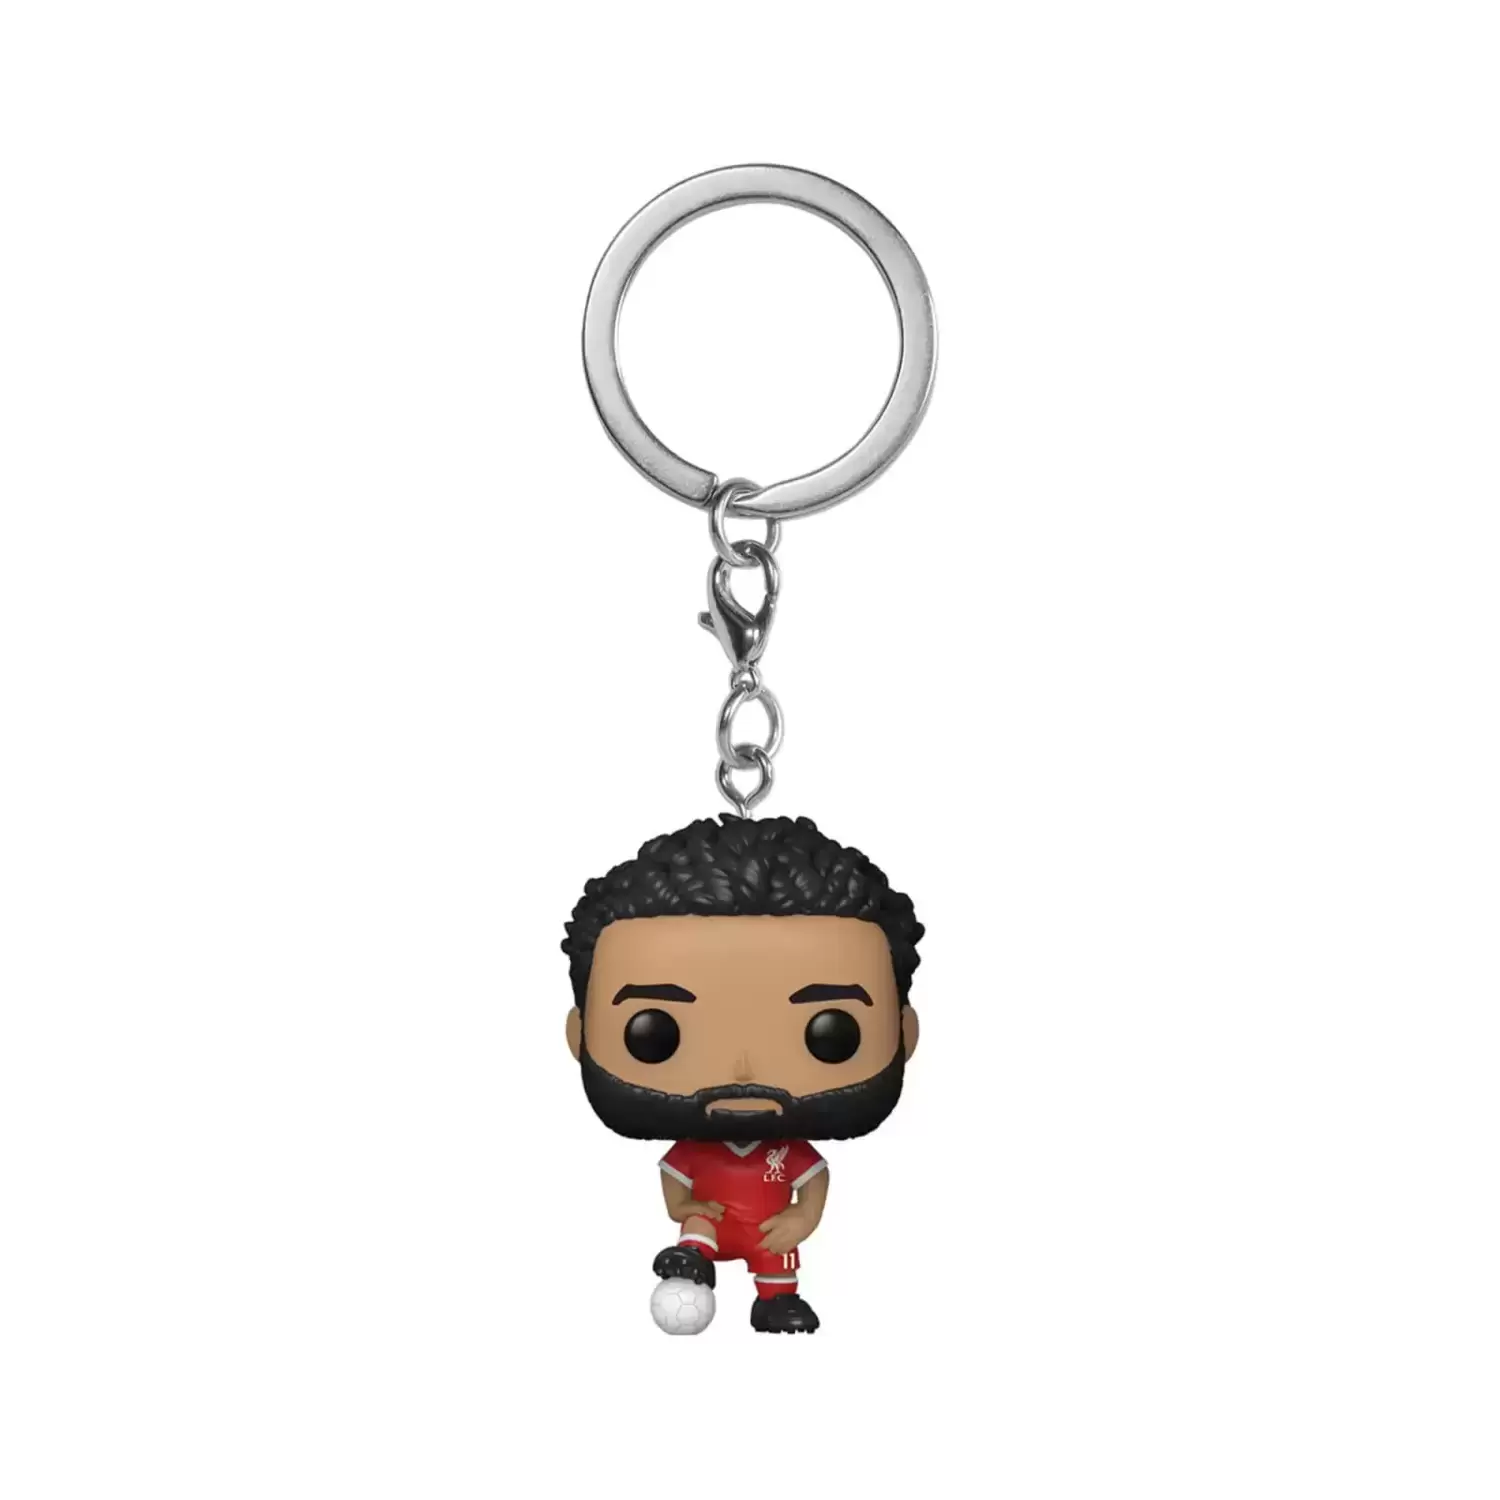 Others - POP! Keychain - Liverpool FC - Mohamed Salah